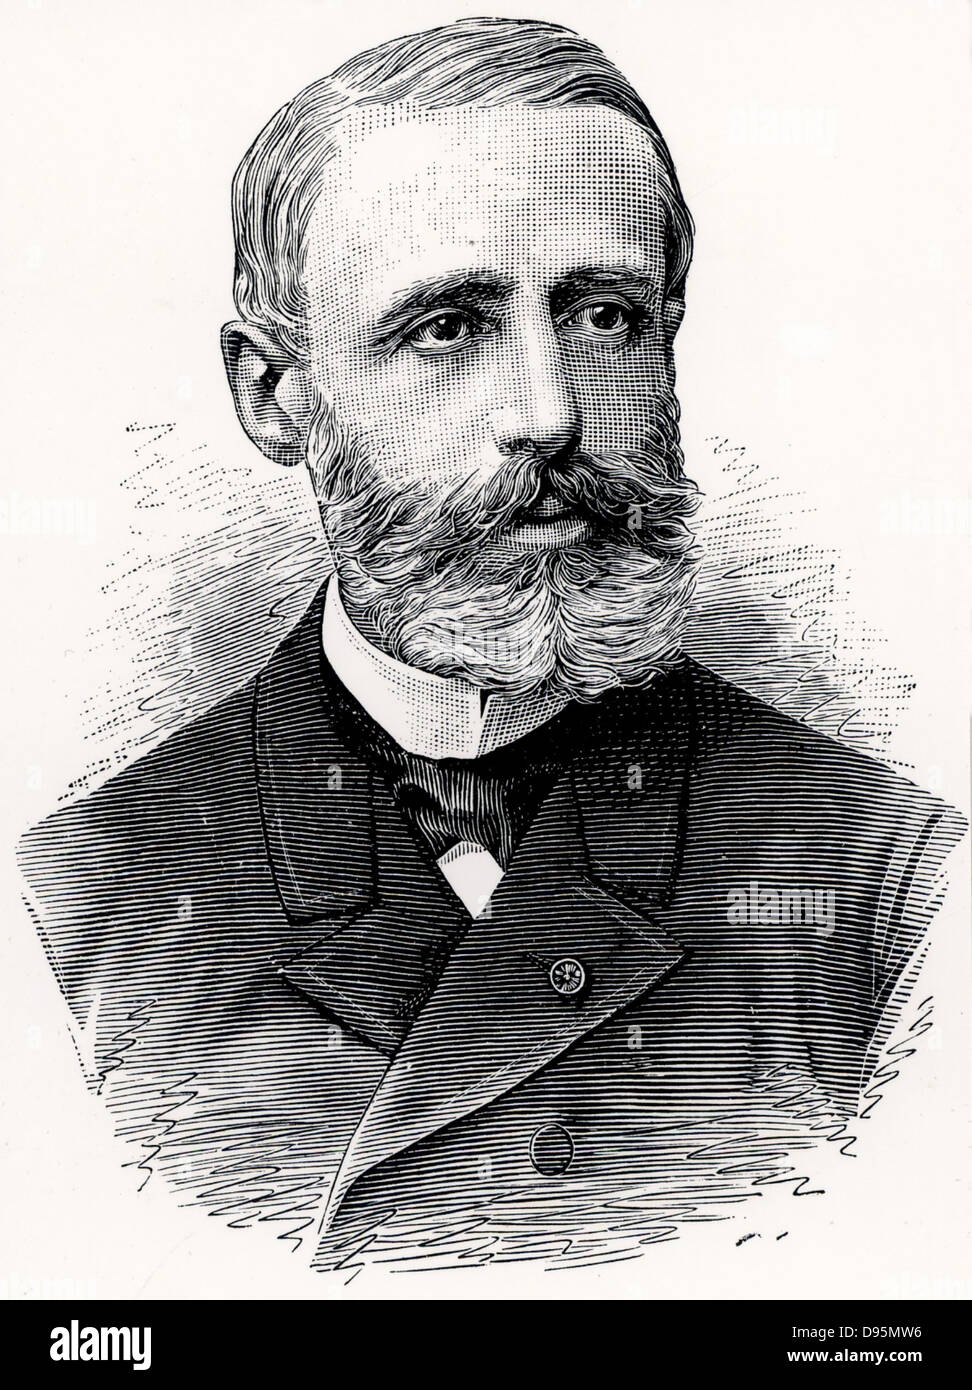 (Raymond) Gaston Plante (1834-1889) French physicist who in 1859 invented the first accumulator or electric storage battery.  It was a wet cell with two lead plates immersed in sulphuric acid, the electrolyte. Engraving from 'A travers l'Electricite' by Georges Dary (Paris, c1906) . Stock Photo